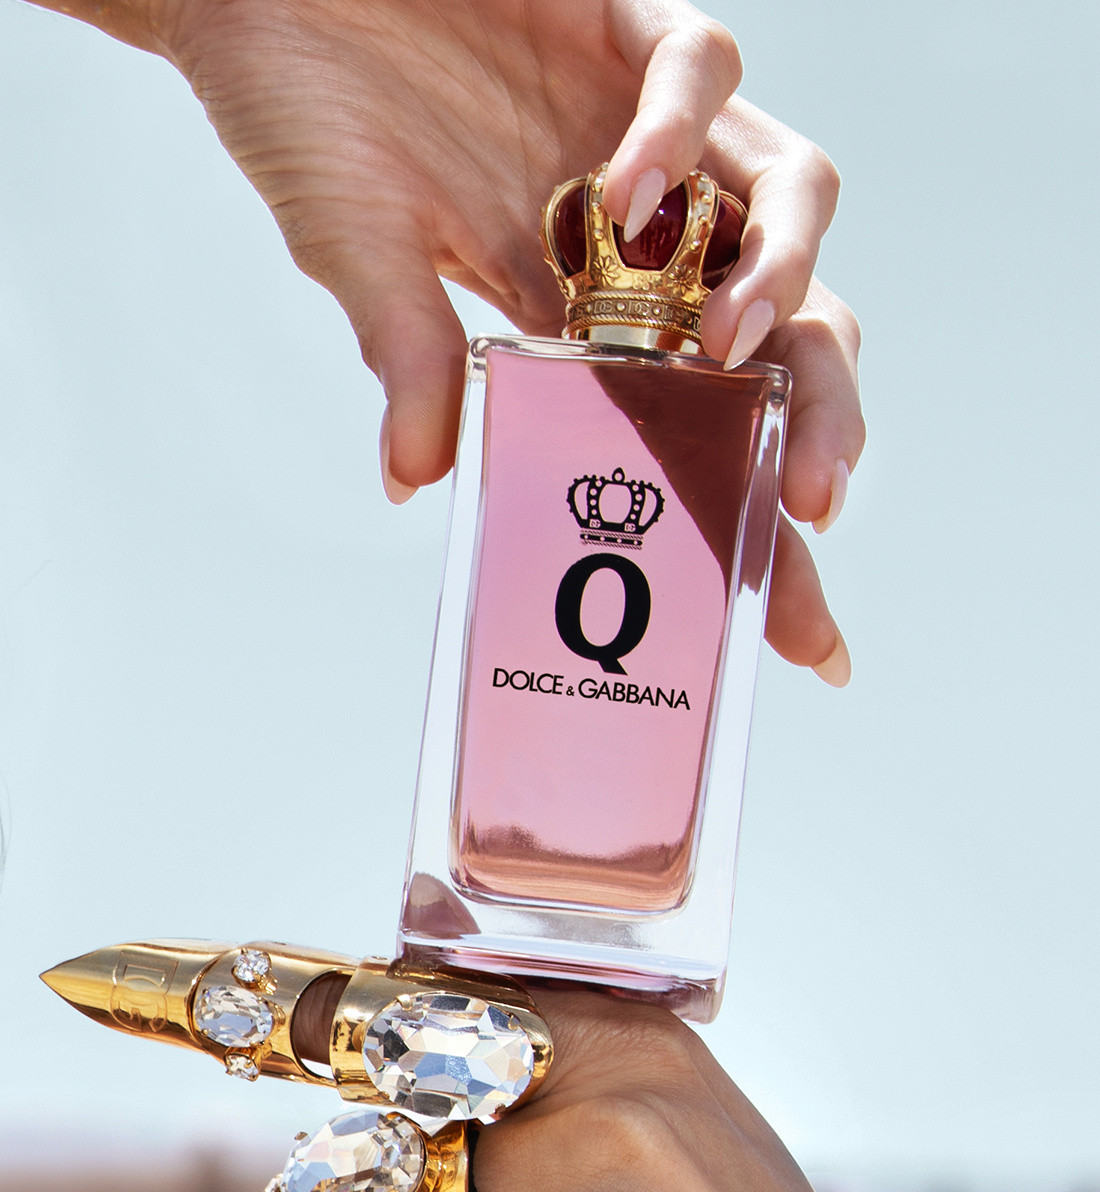 Dolce & Gabbana Q: A Mish-Mash Of Old And New ~ Fragrance Reviews